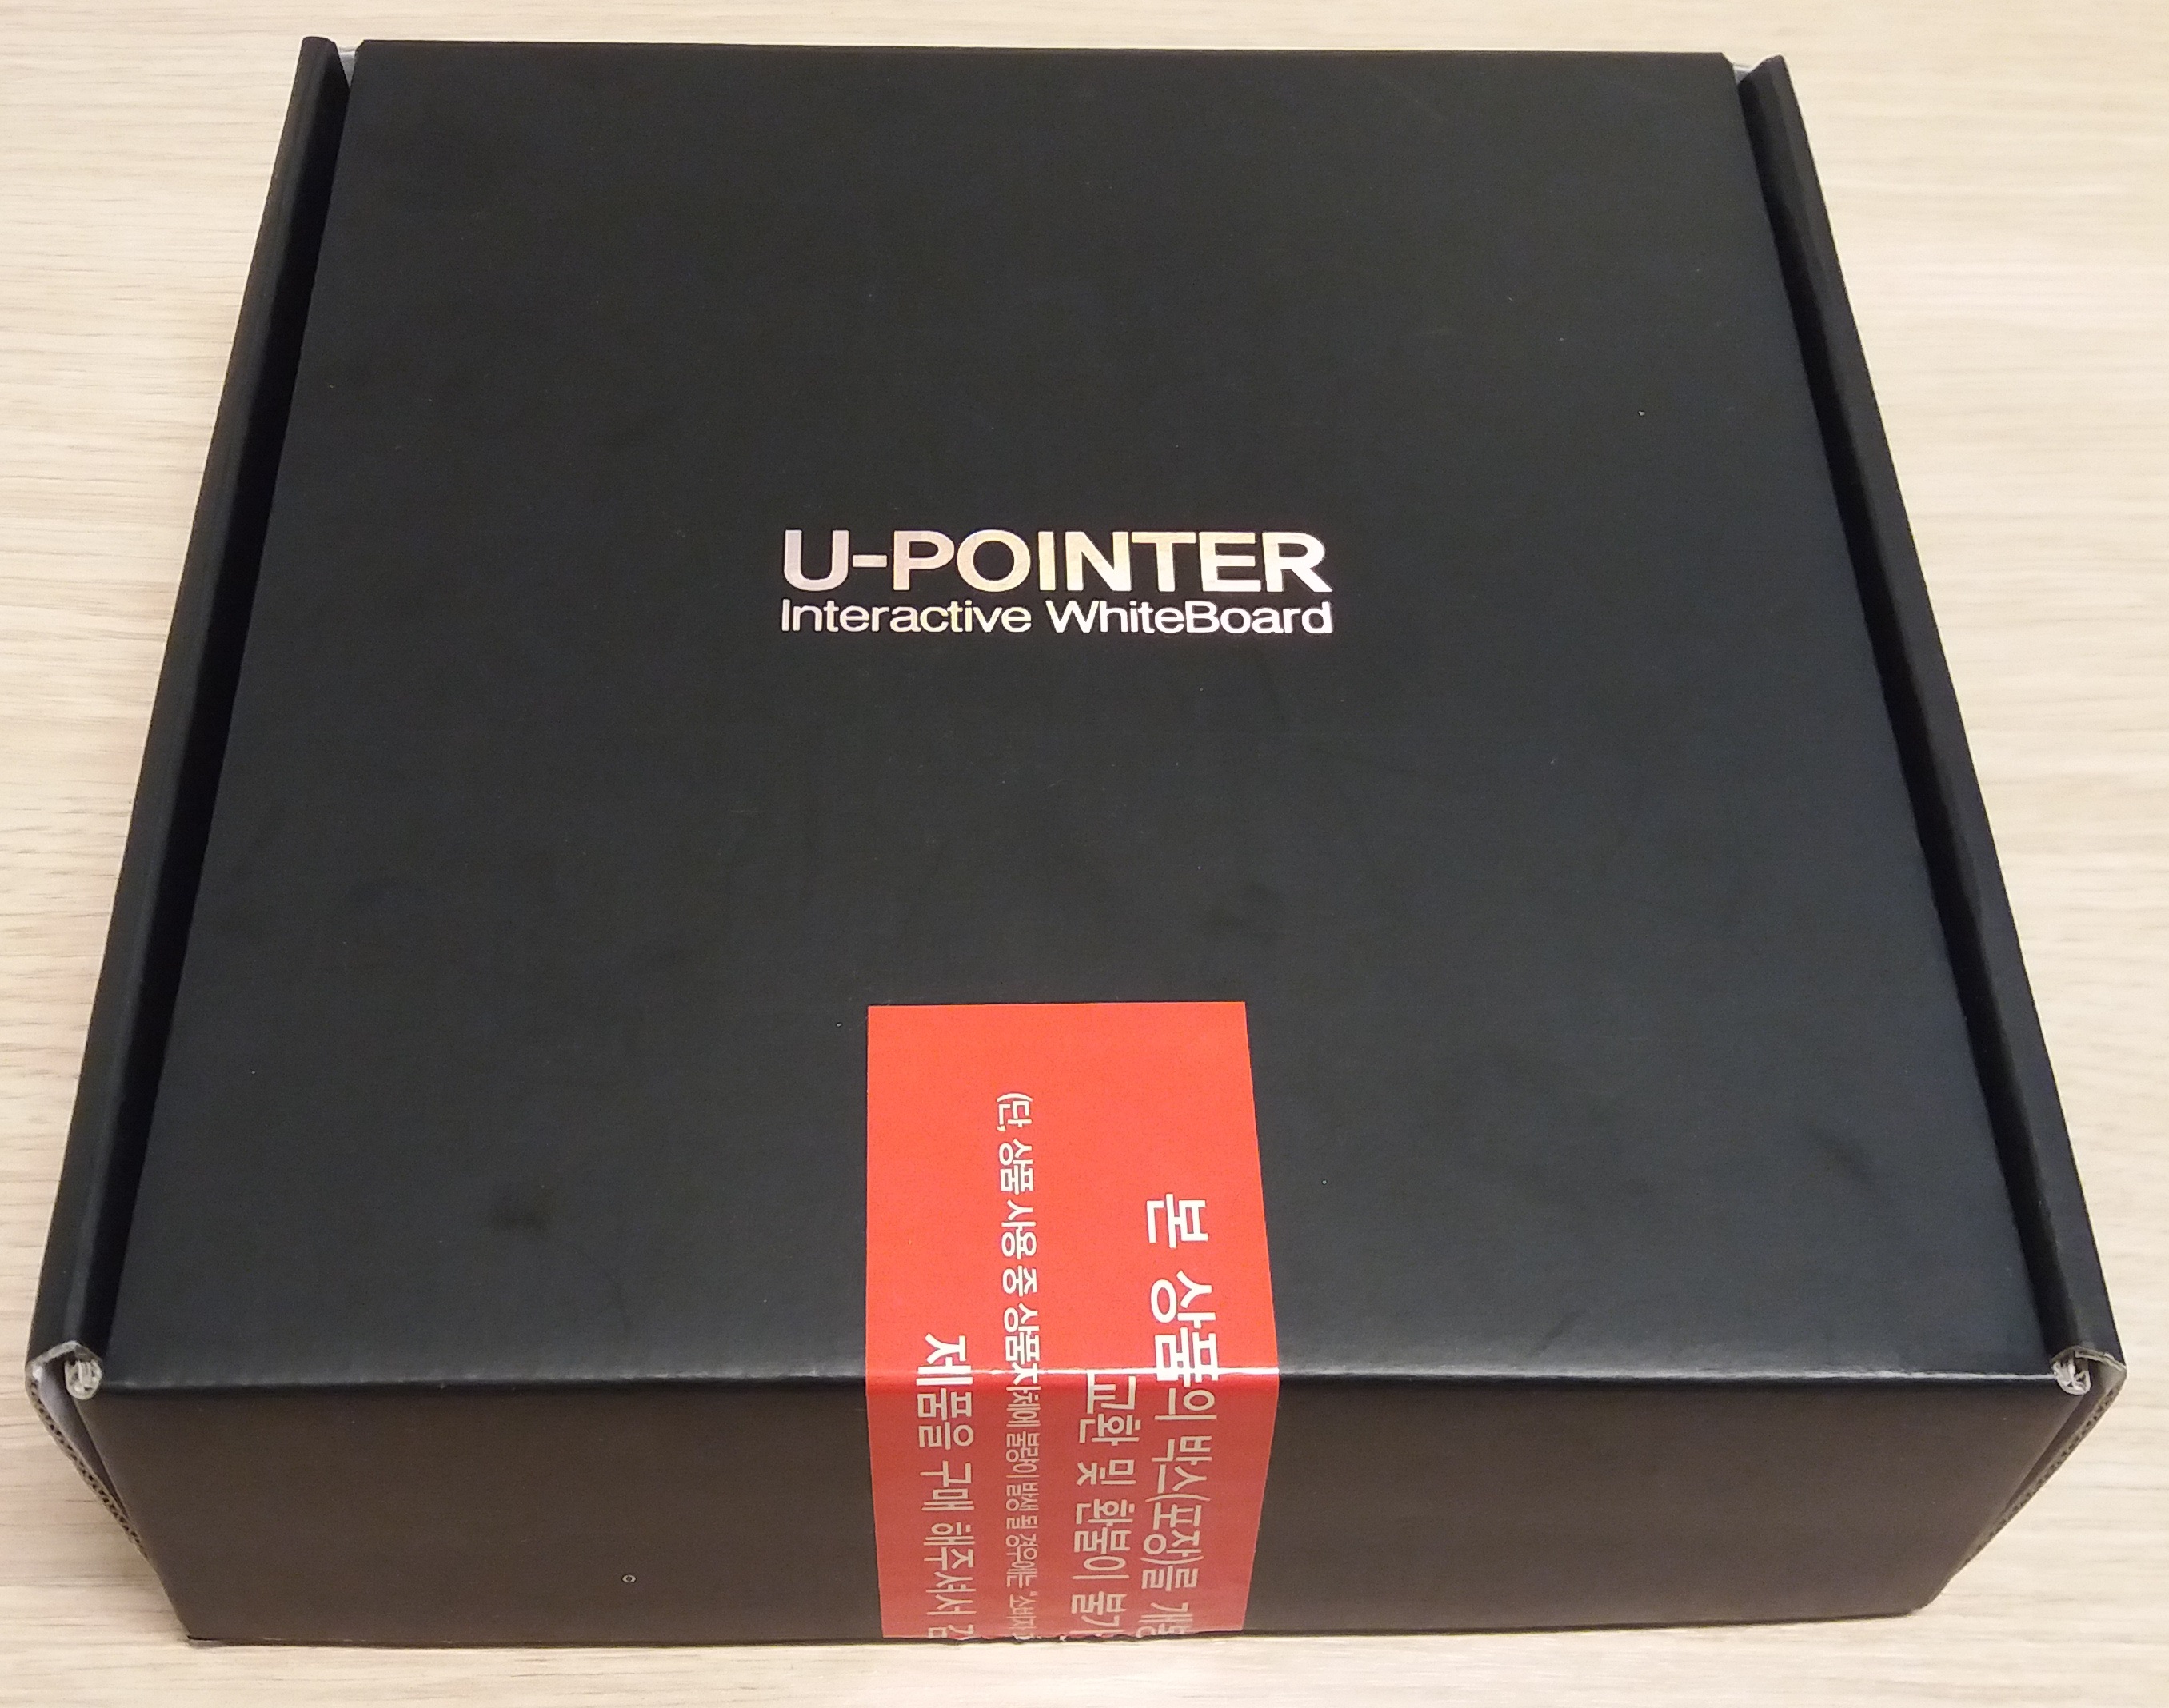 U-POINTER - JM Consulting & Systems